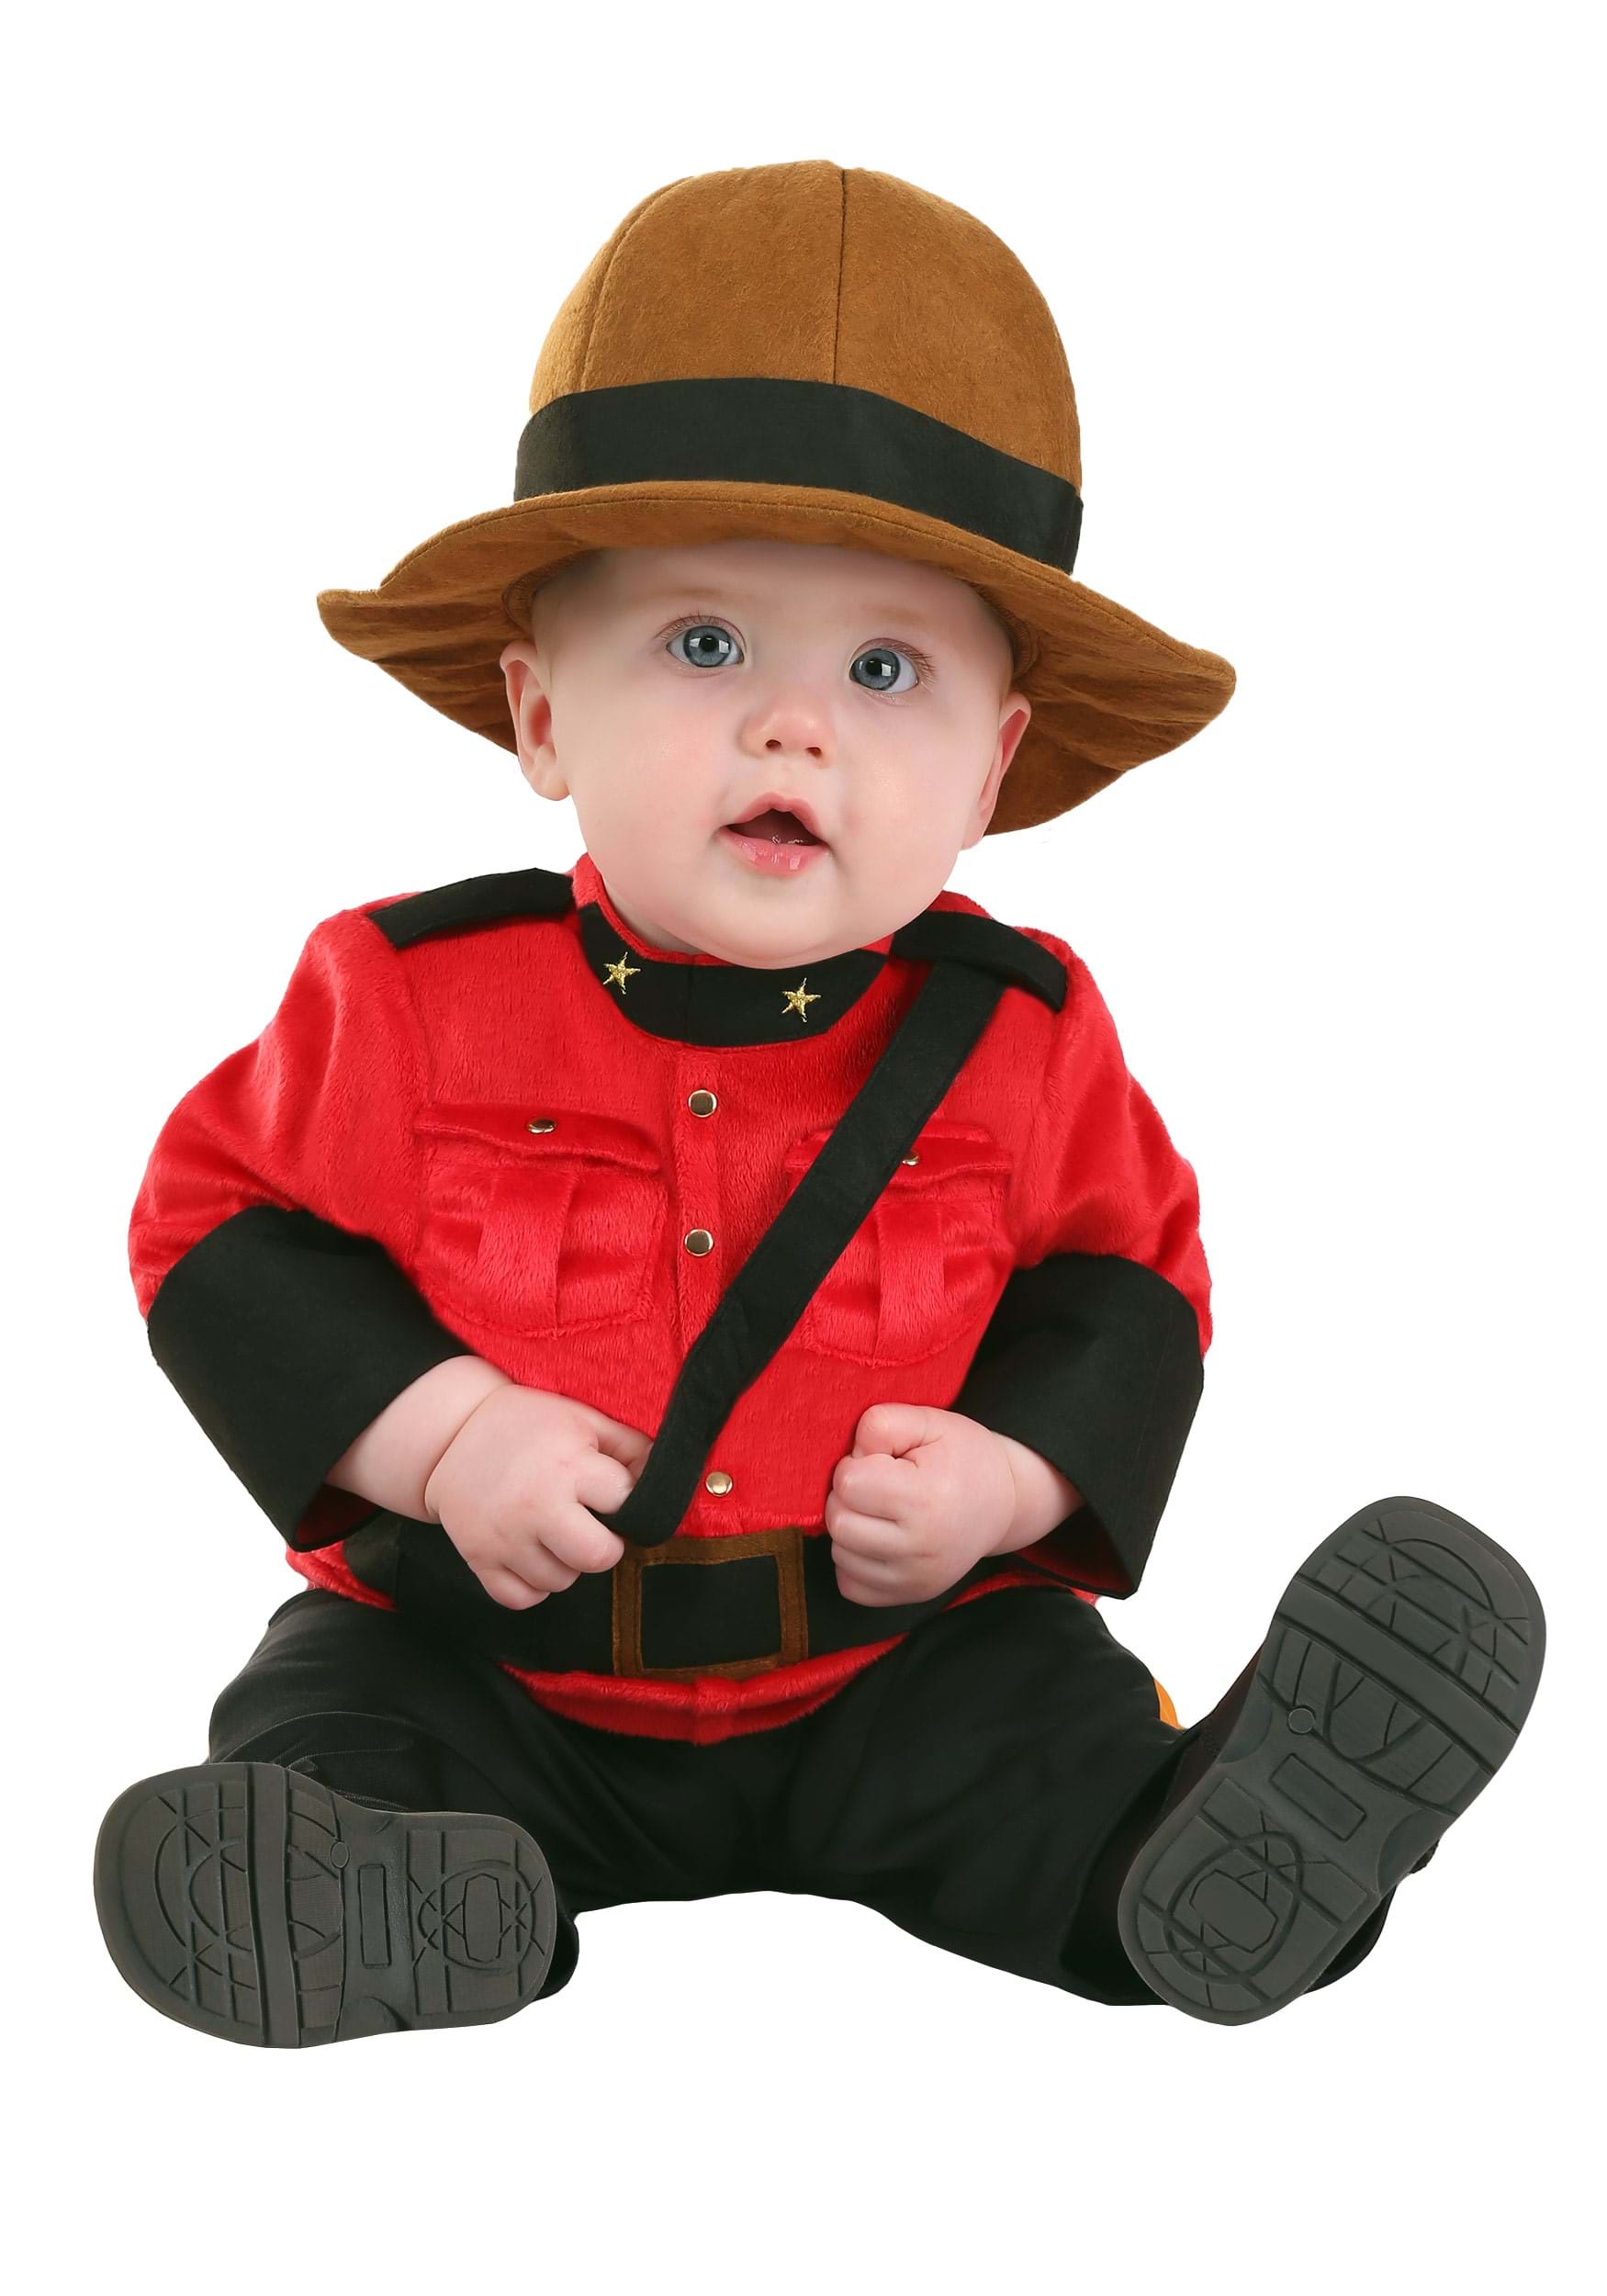 Photos - Fancy Dress FUN Costumes Canadian Mountie Infant Costume Black/Yellow/Red FUN1